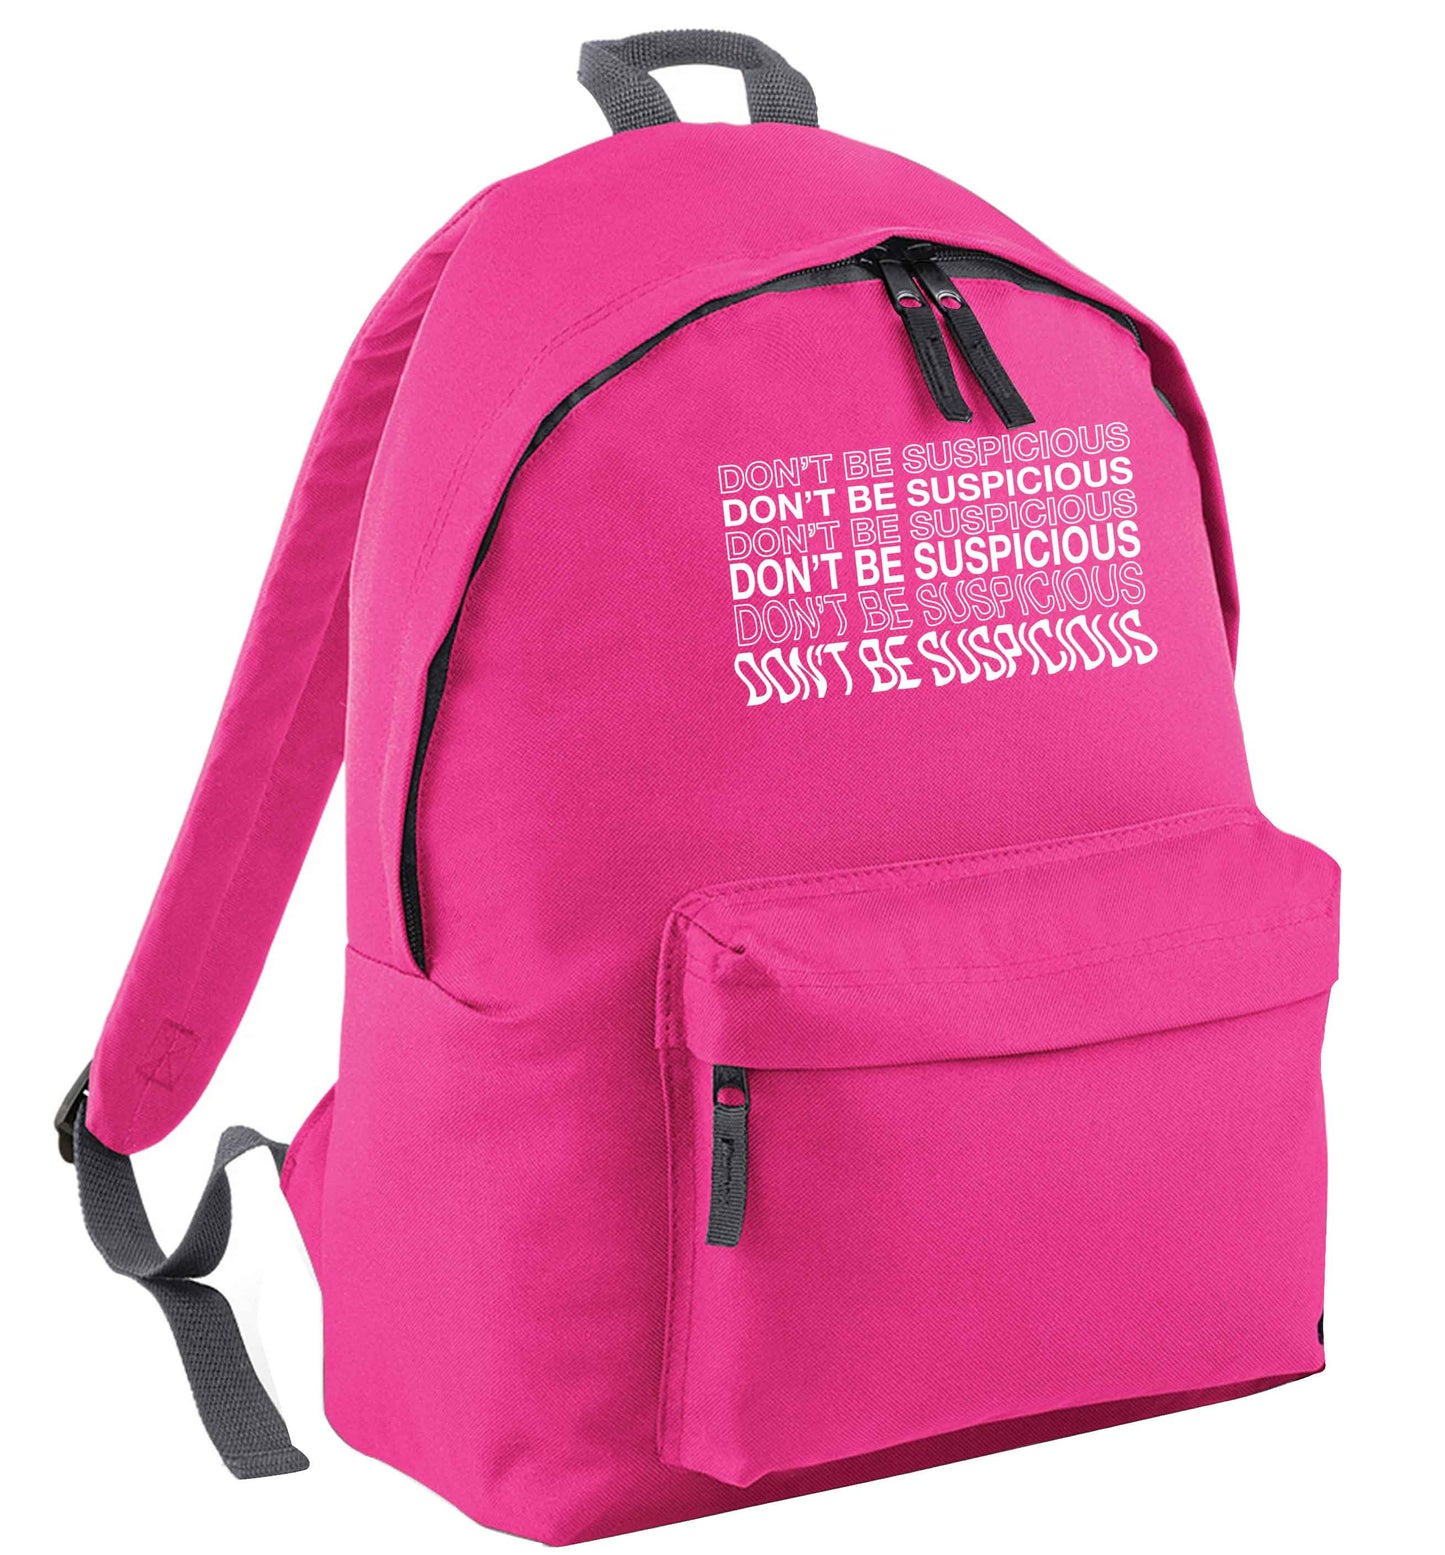 Viral funny memes! Designs for the gen z generation!  pink adults backpack